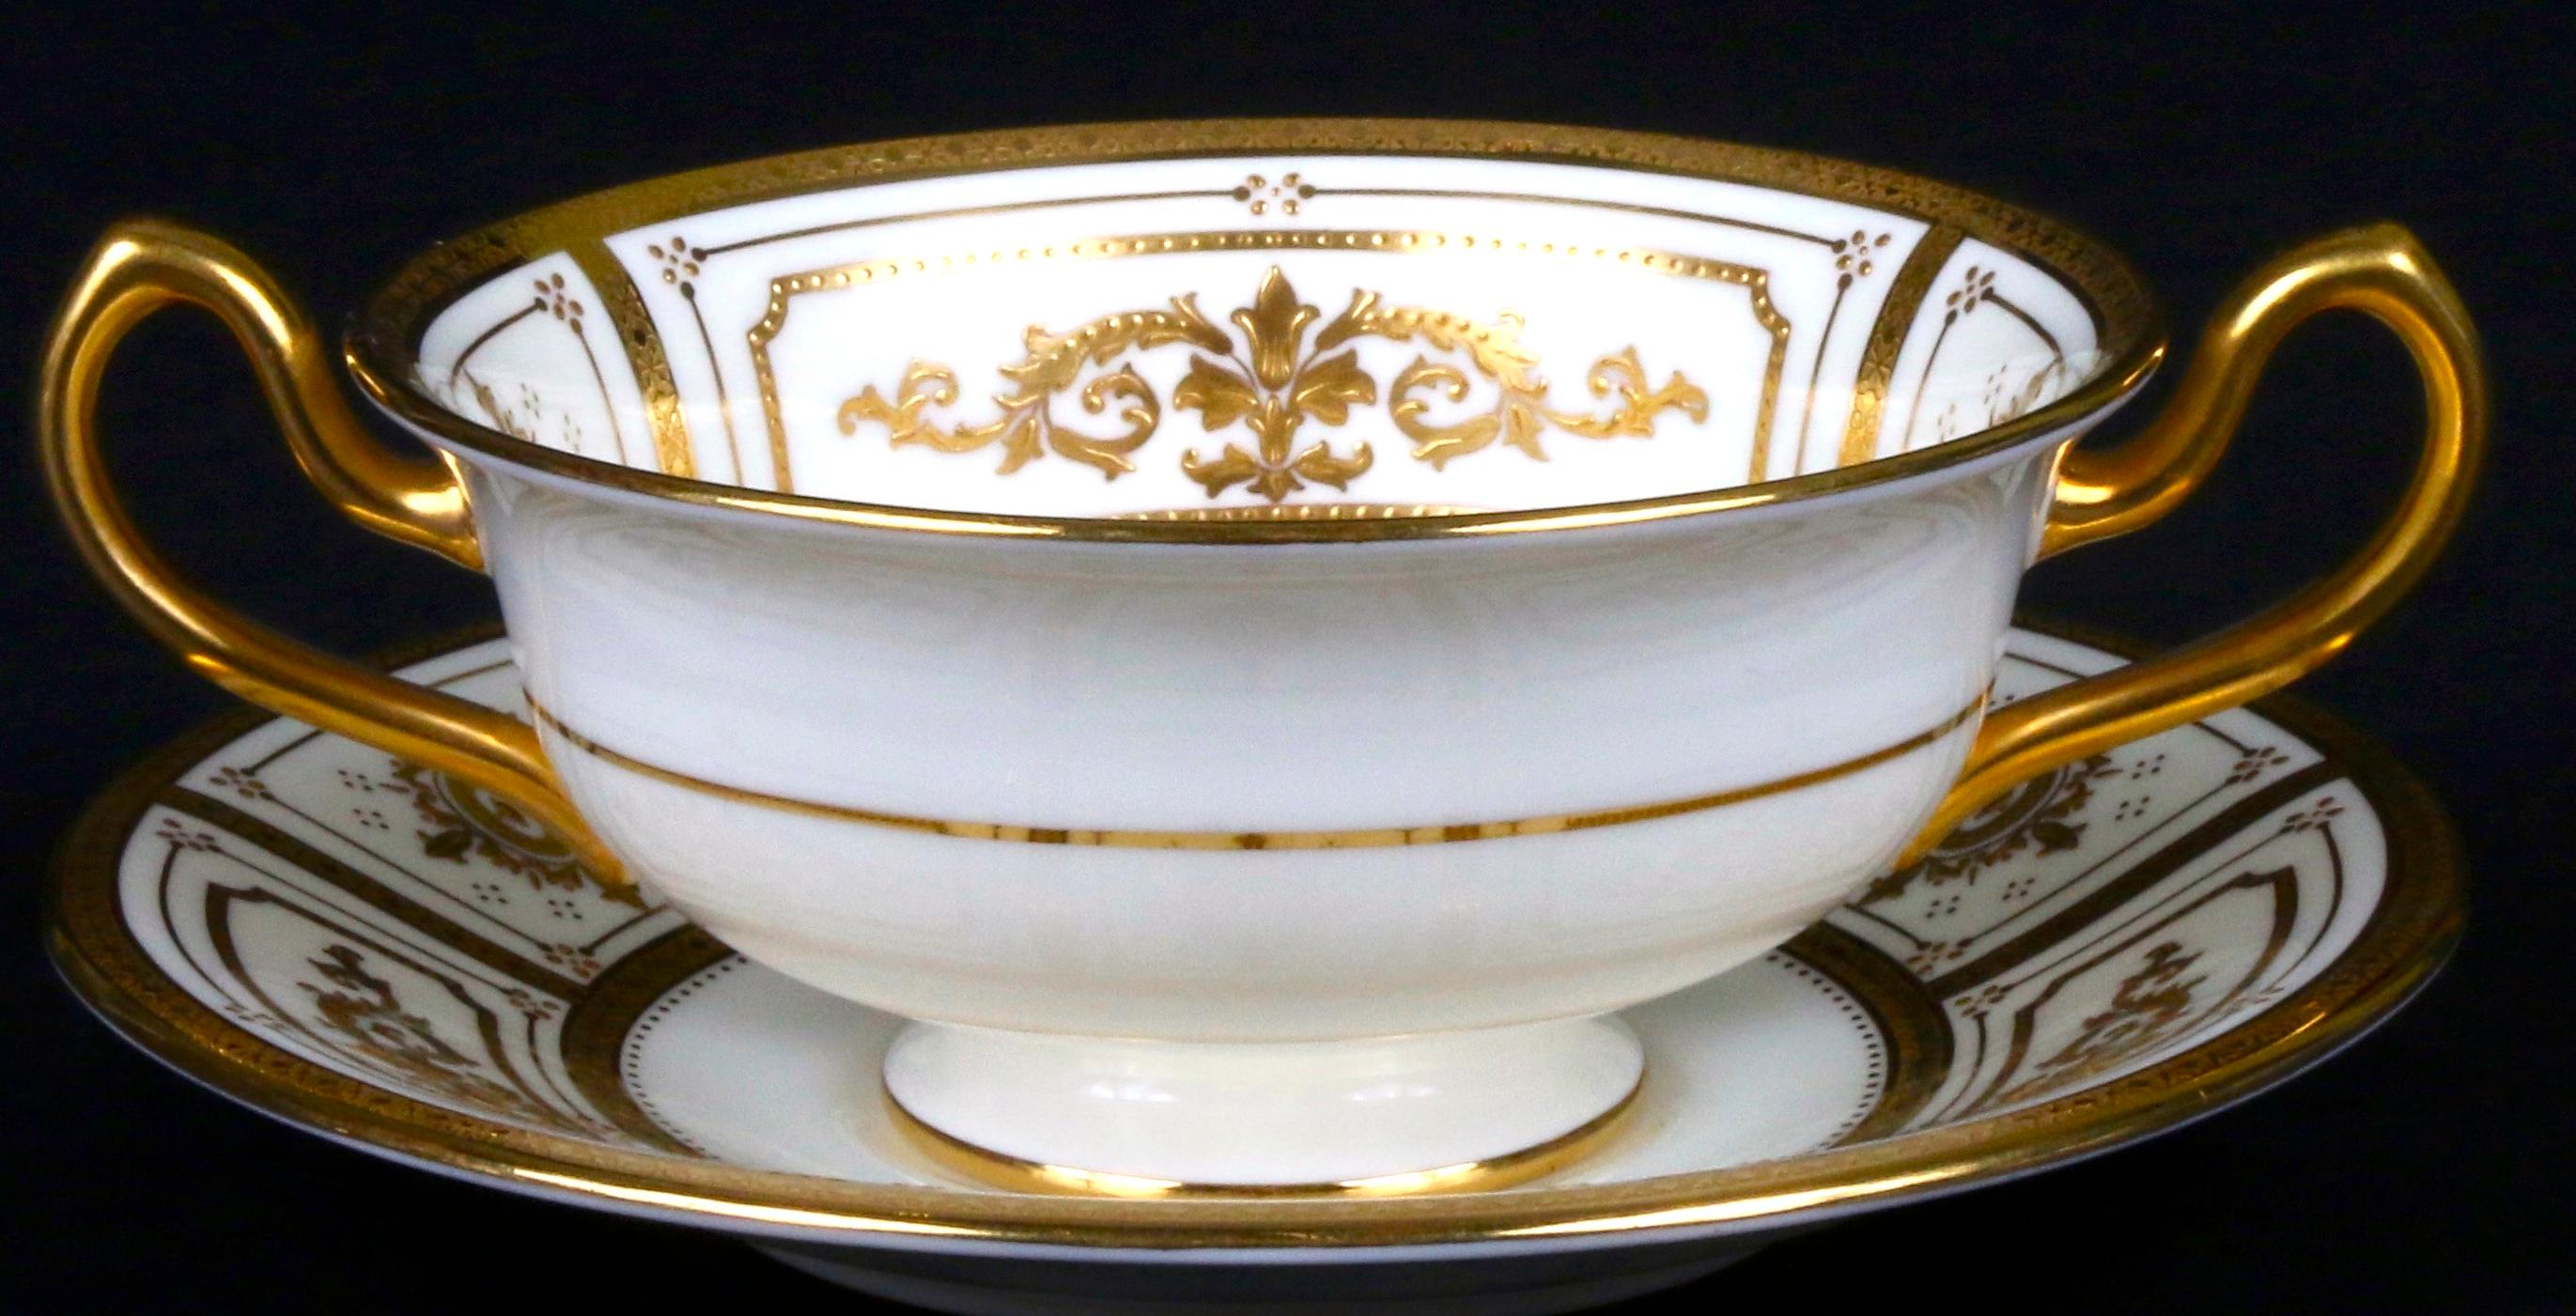 Complete Service for 12 of Minton for Tiffany Neoclassical Style Gilded Plates For Sale 5